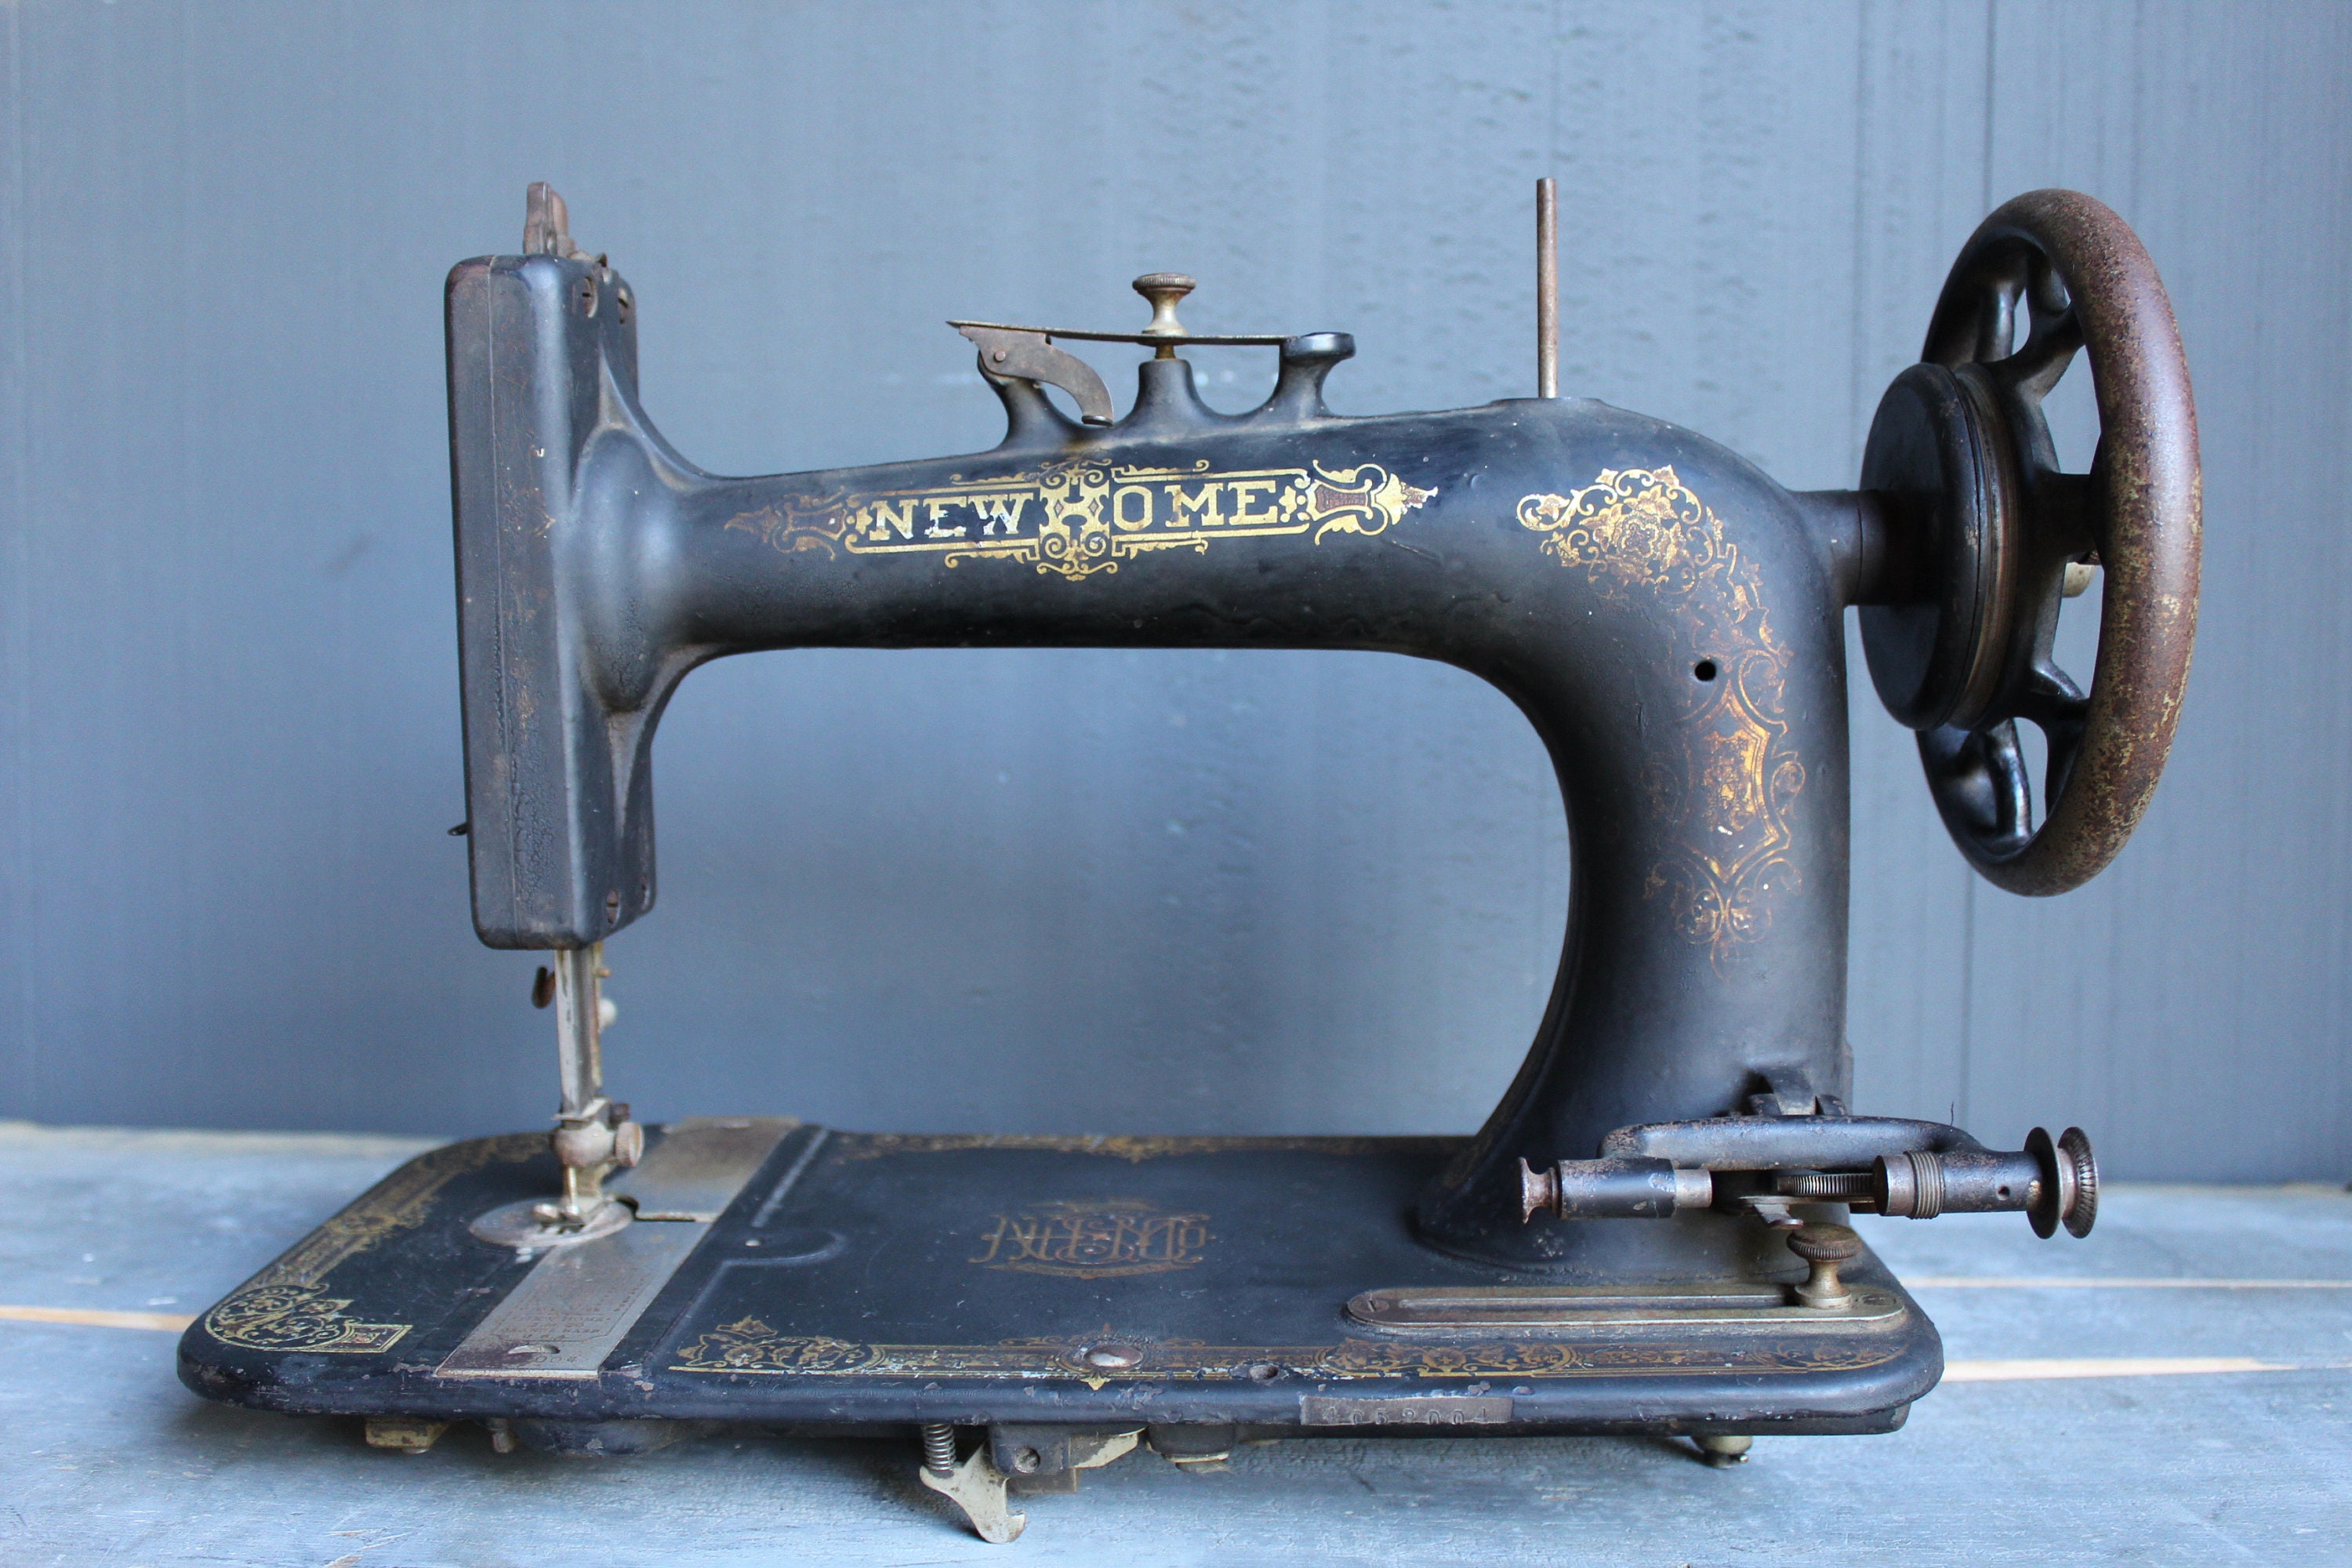 Antique Sewing Machine New Home Sewing Machine Sm Black Etsy